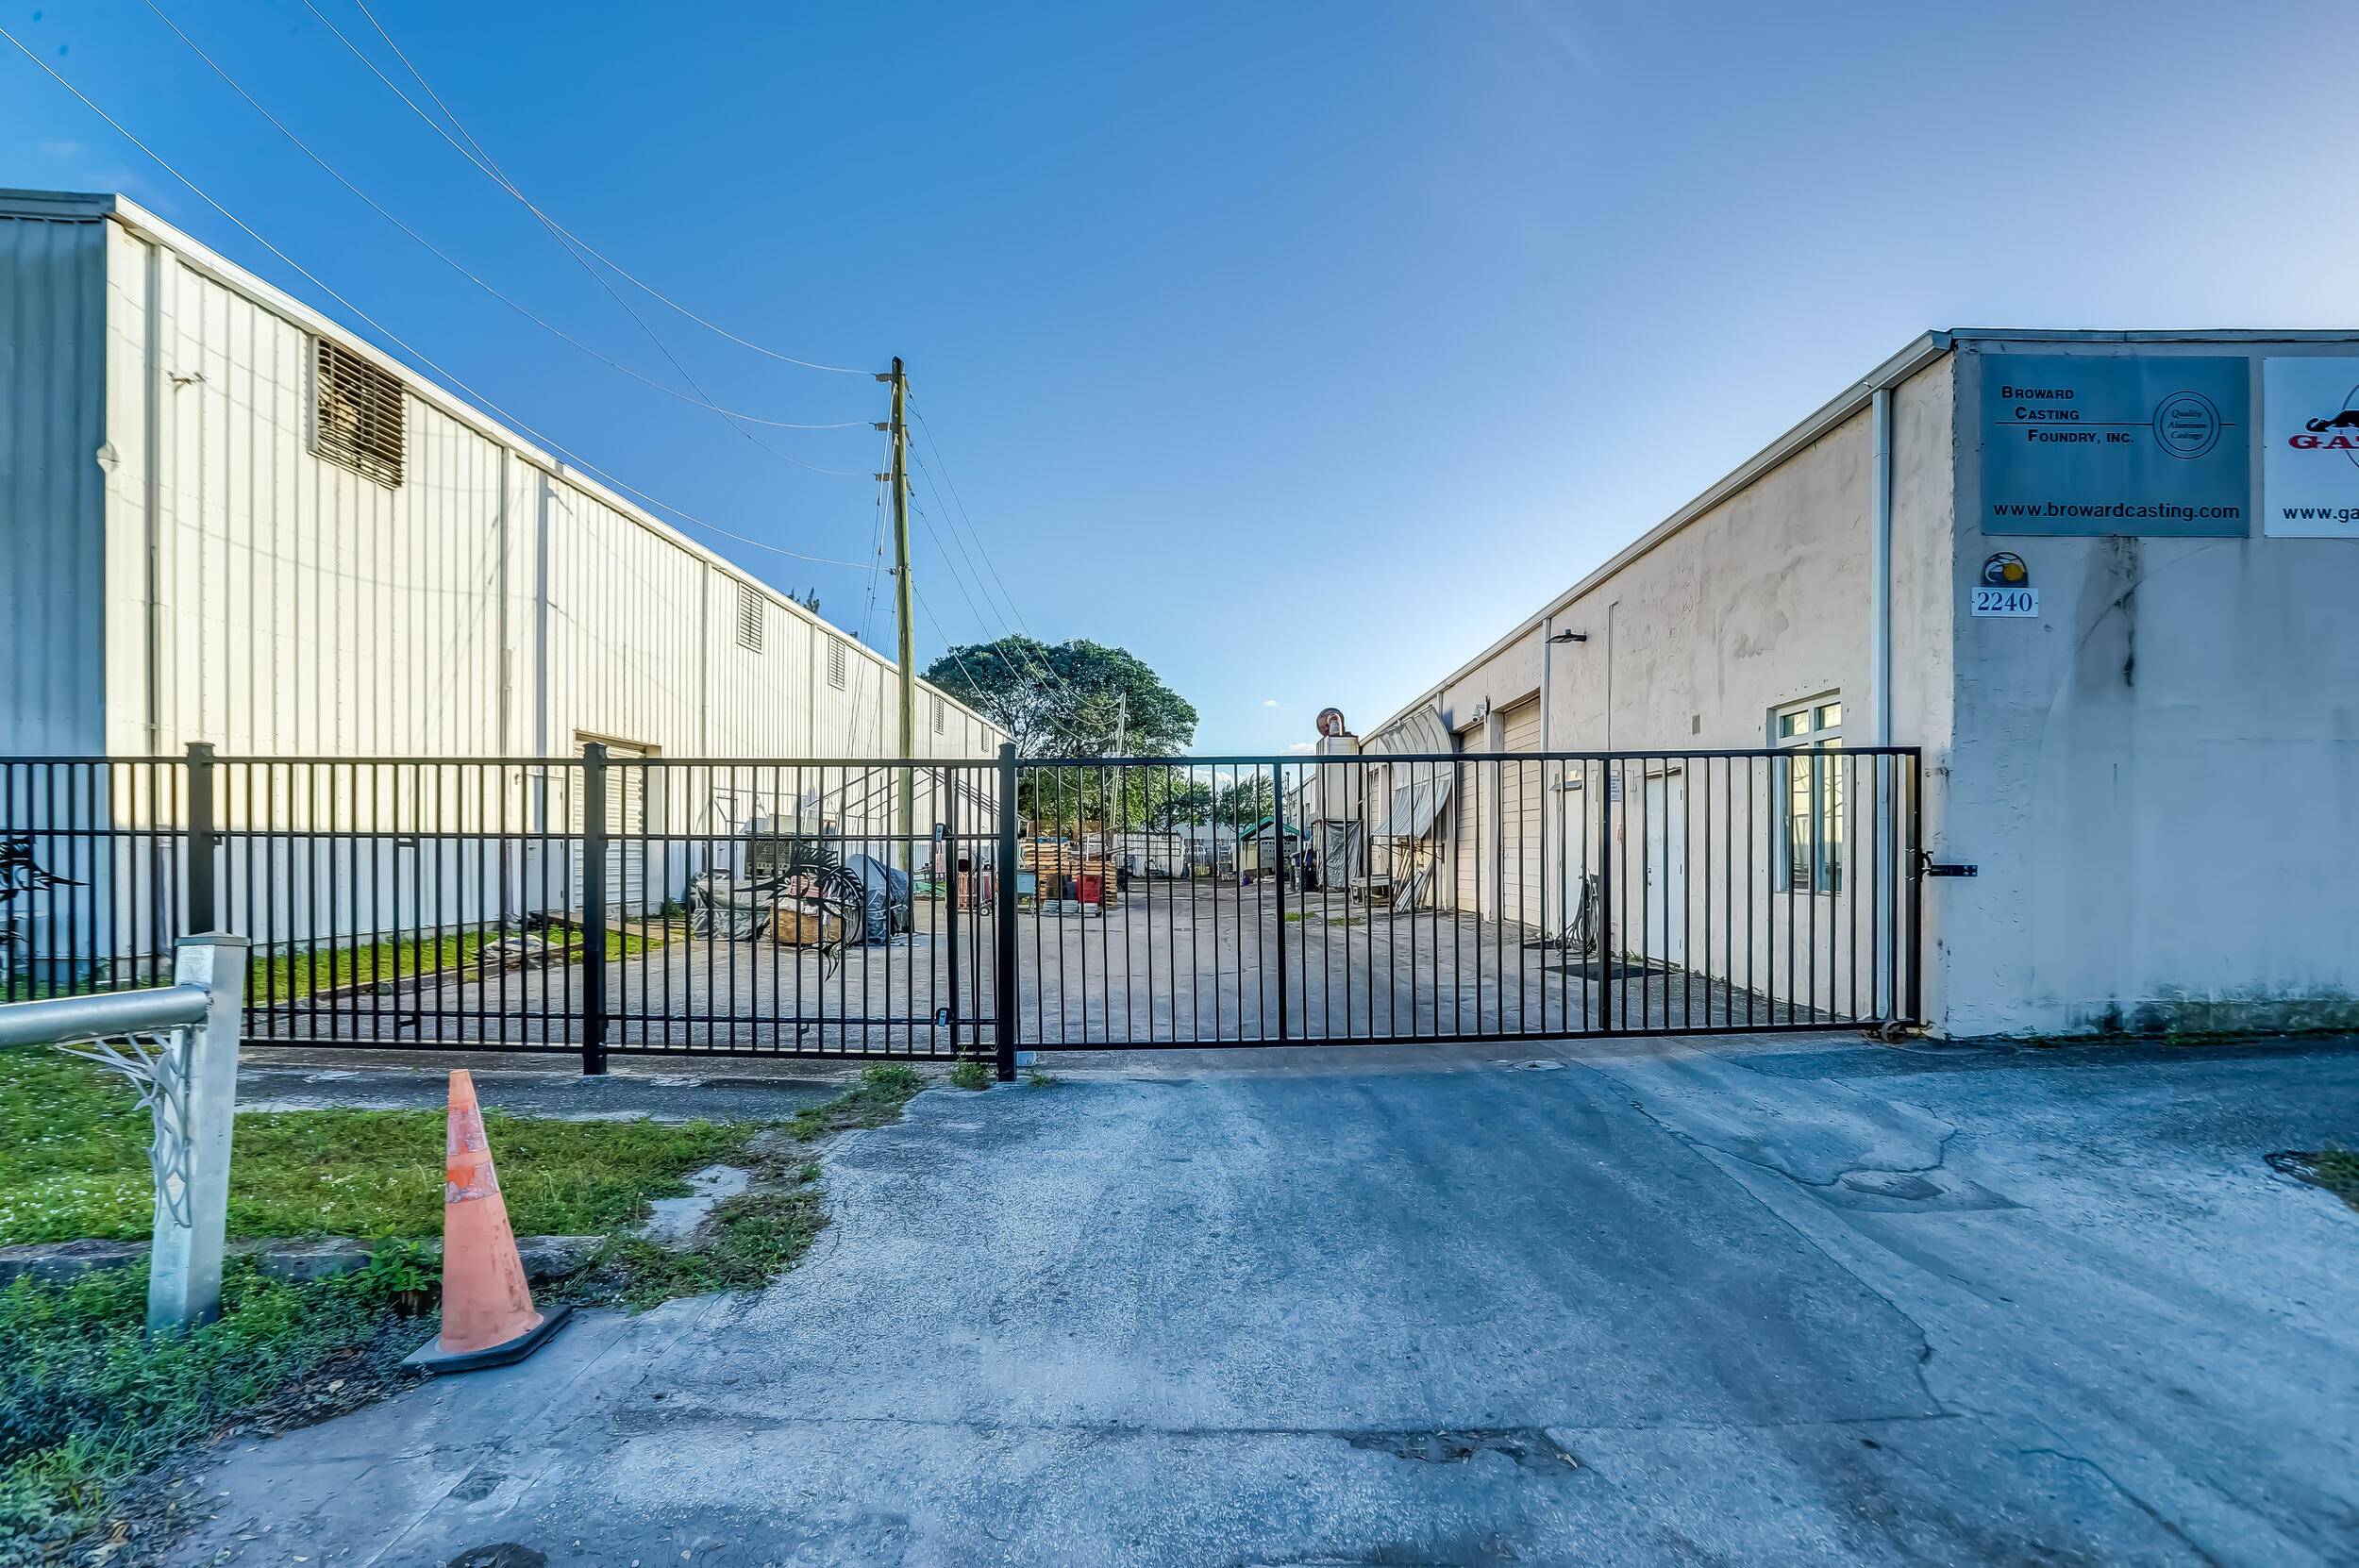 Business for Sale with Prime Industrial Property Near Fort Lauderdale AirportWelcome to Aluminum Casting Foundry, a well established fifty year old business, now available for sale along with its accompanying ...